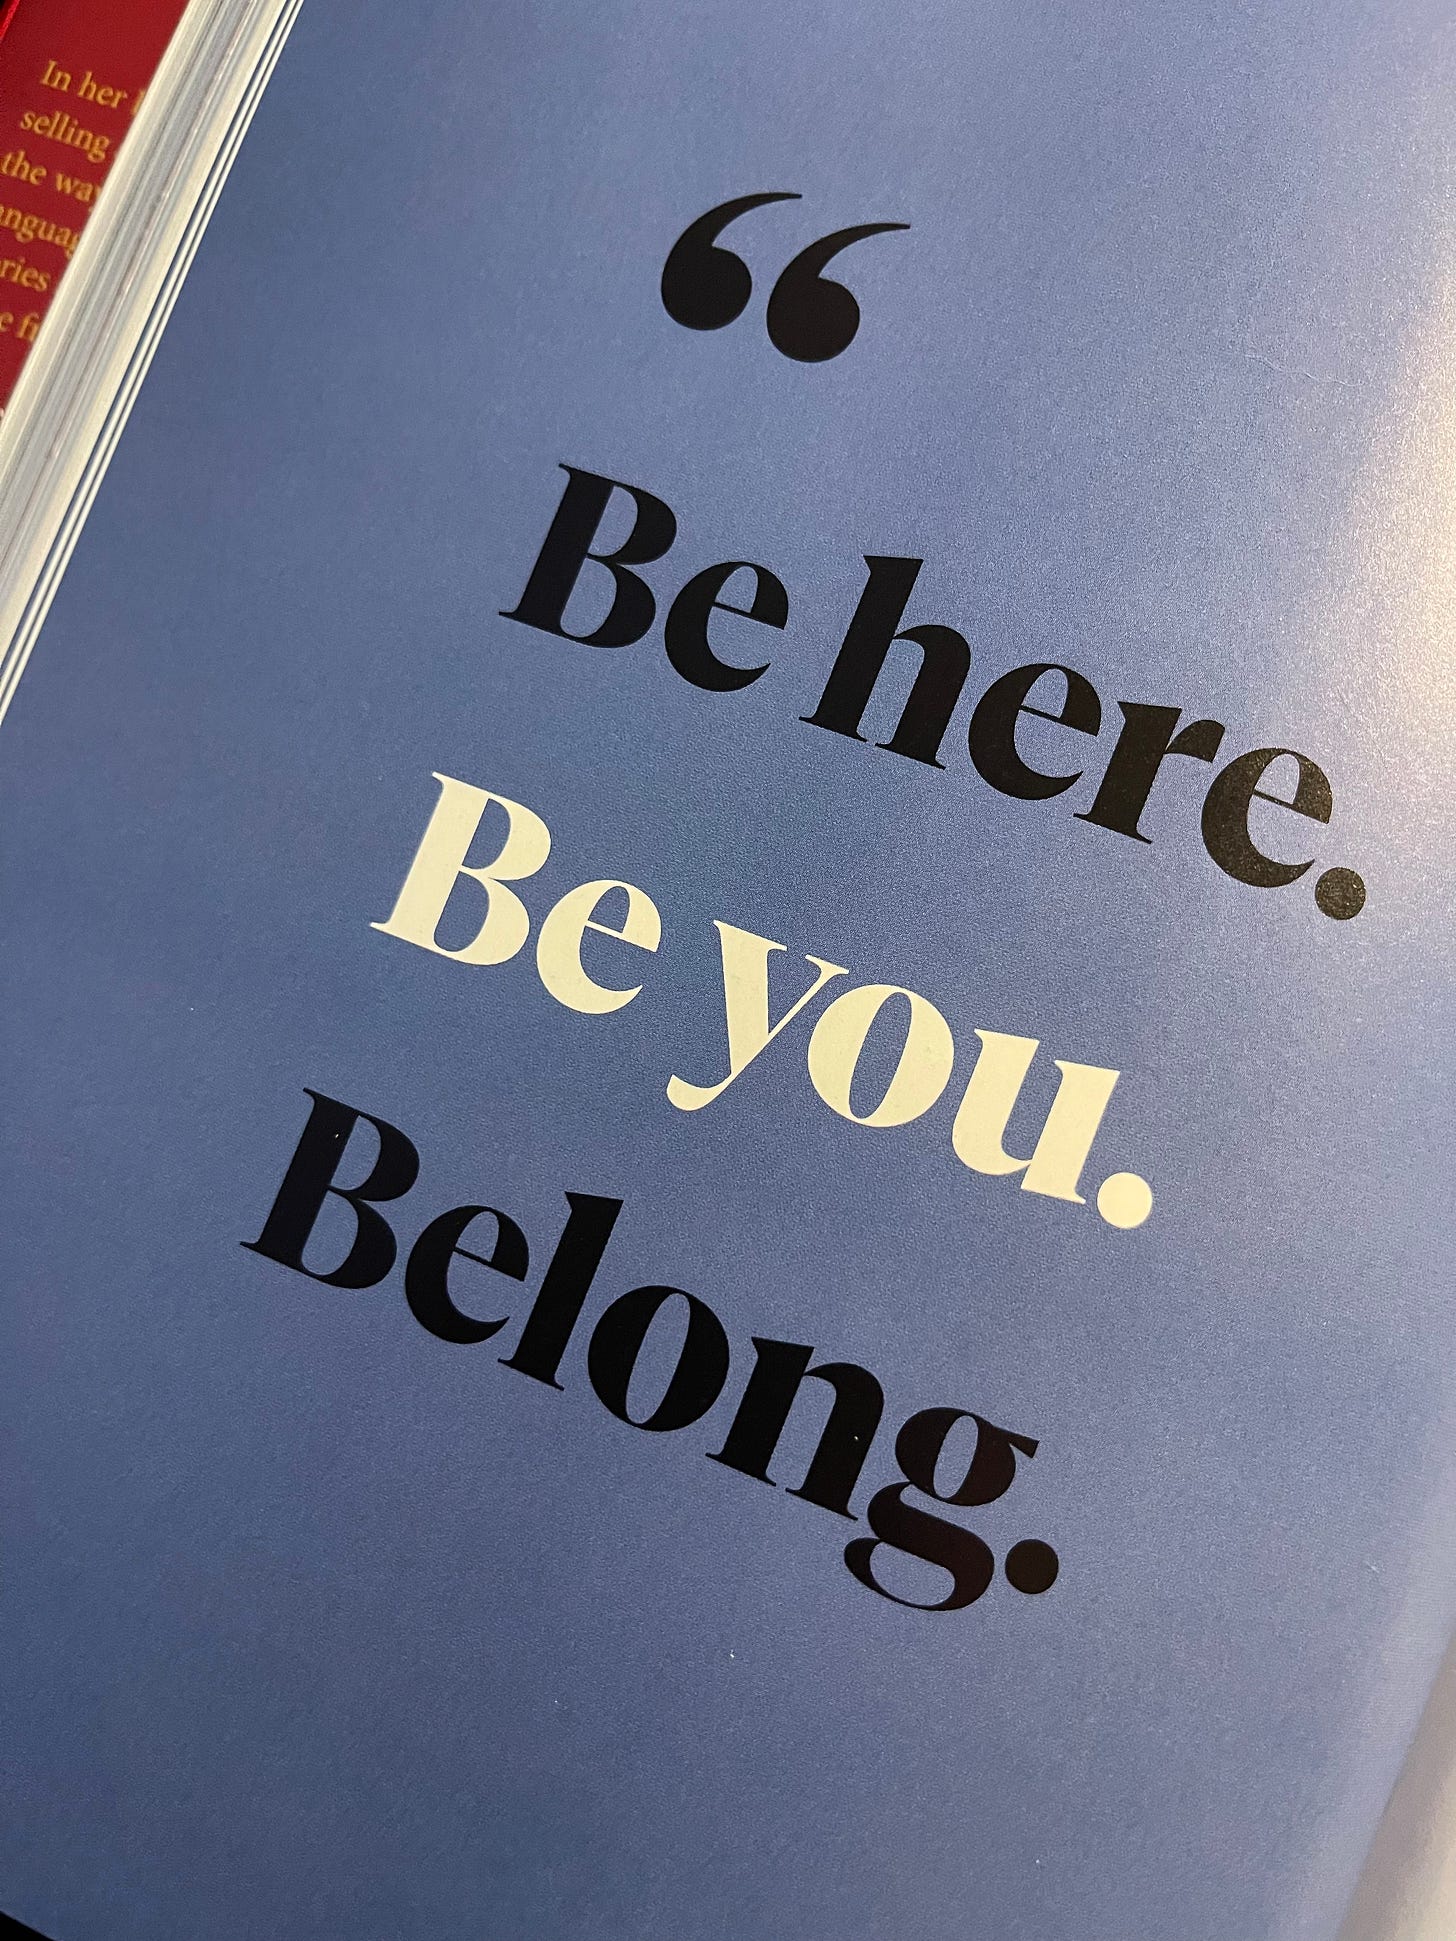 Quote “Be here. Be you. Belong,” p. 164 in Atlas of the Heart by Brené Brown, PhD, MSW, image taken by Mollie Isaacks